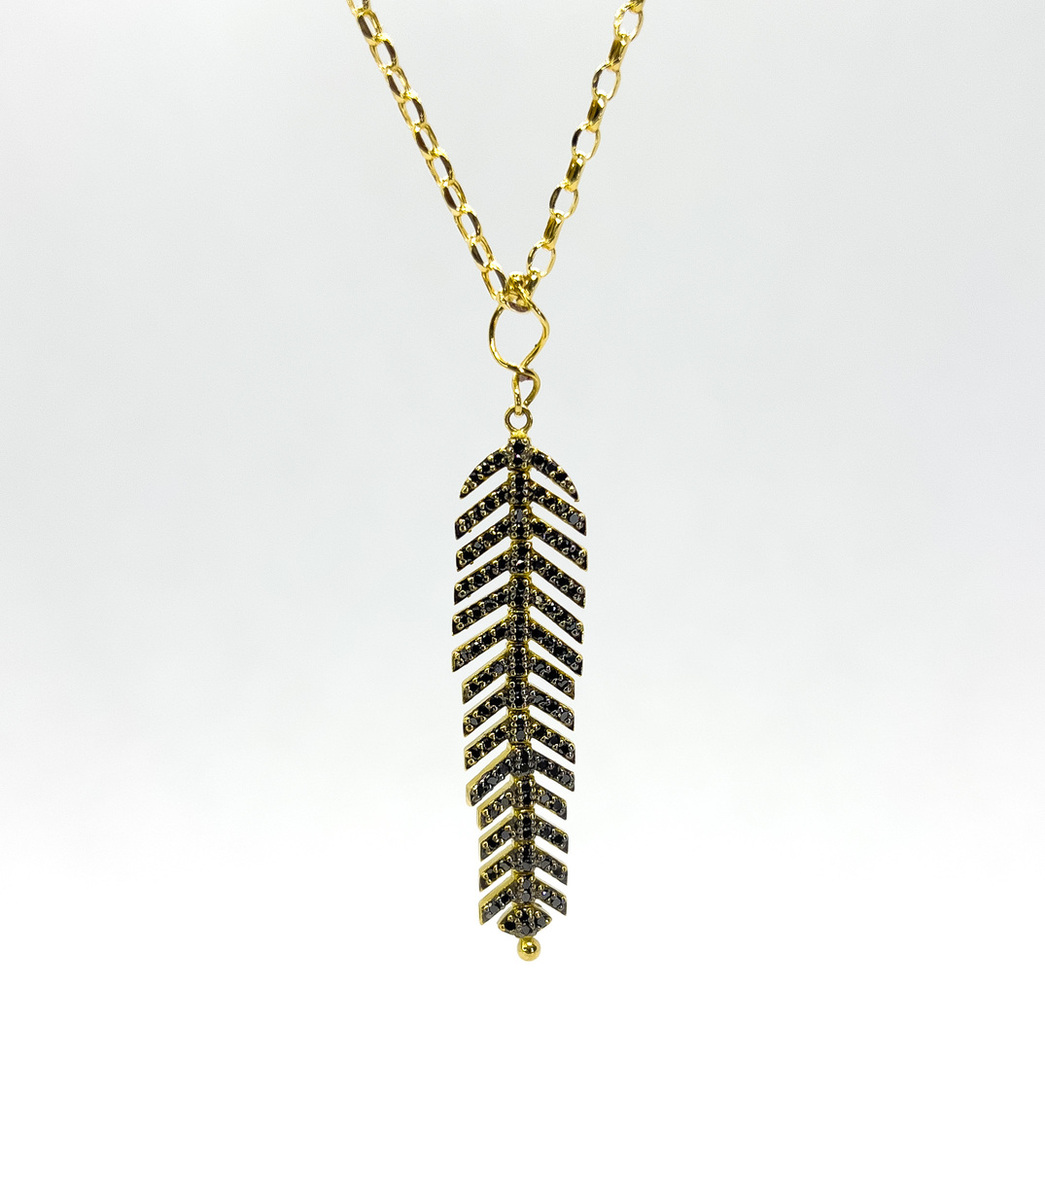 18kt yellow gold necklace with leaf pendant in black diamond